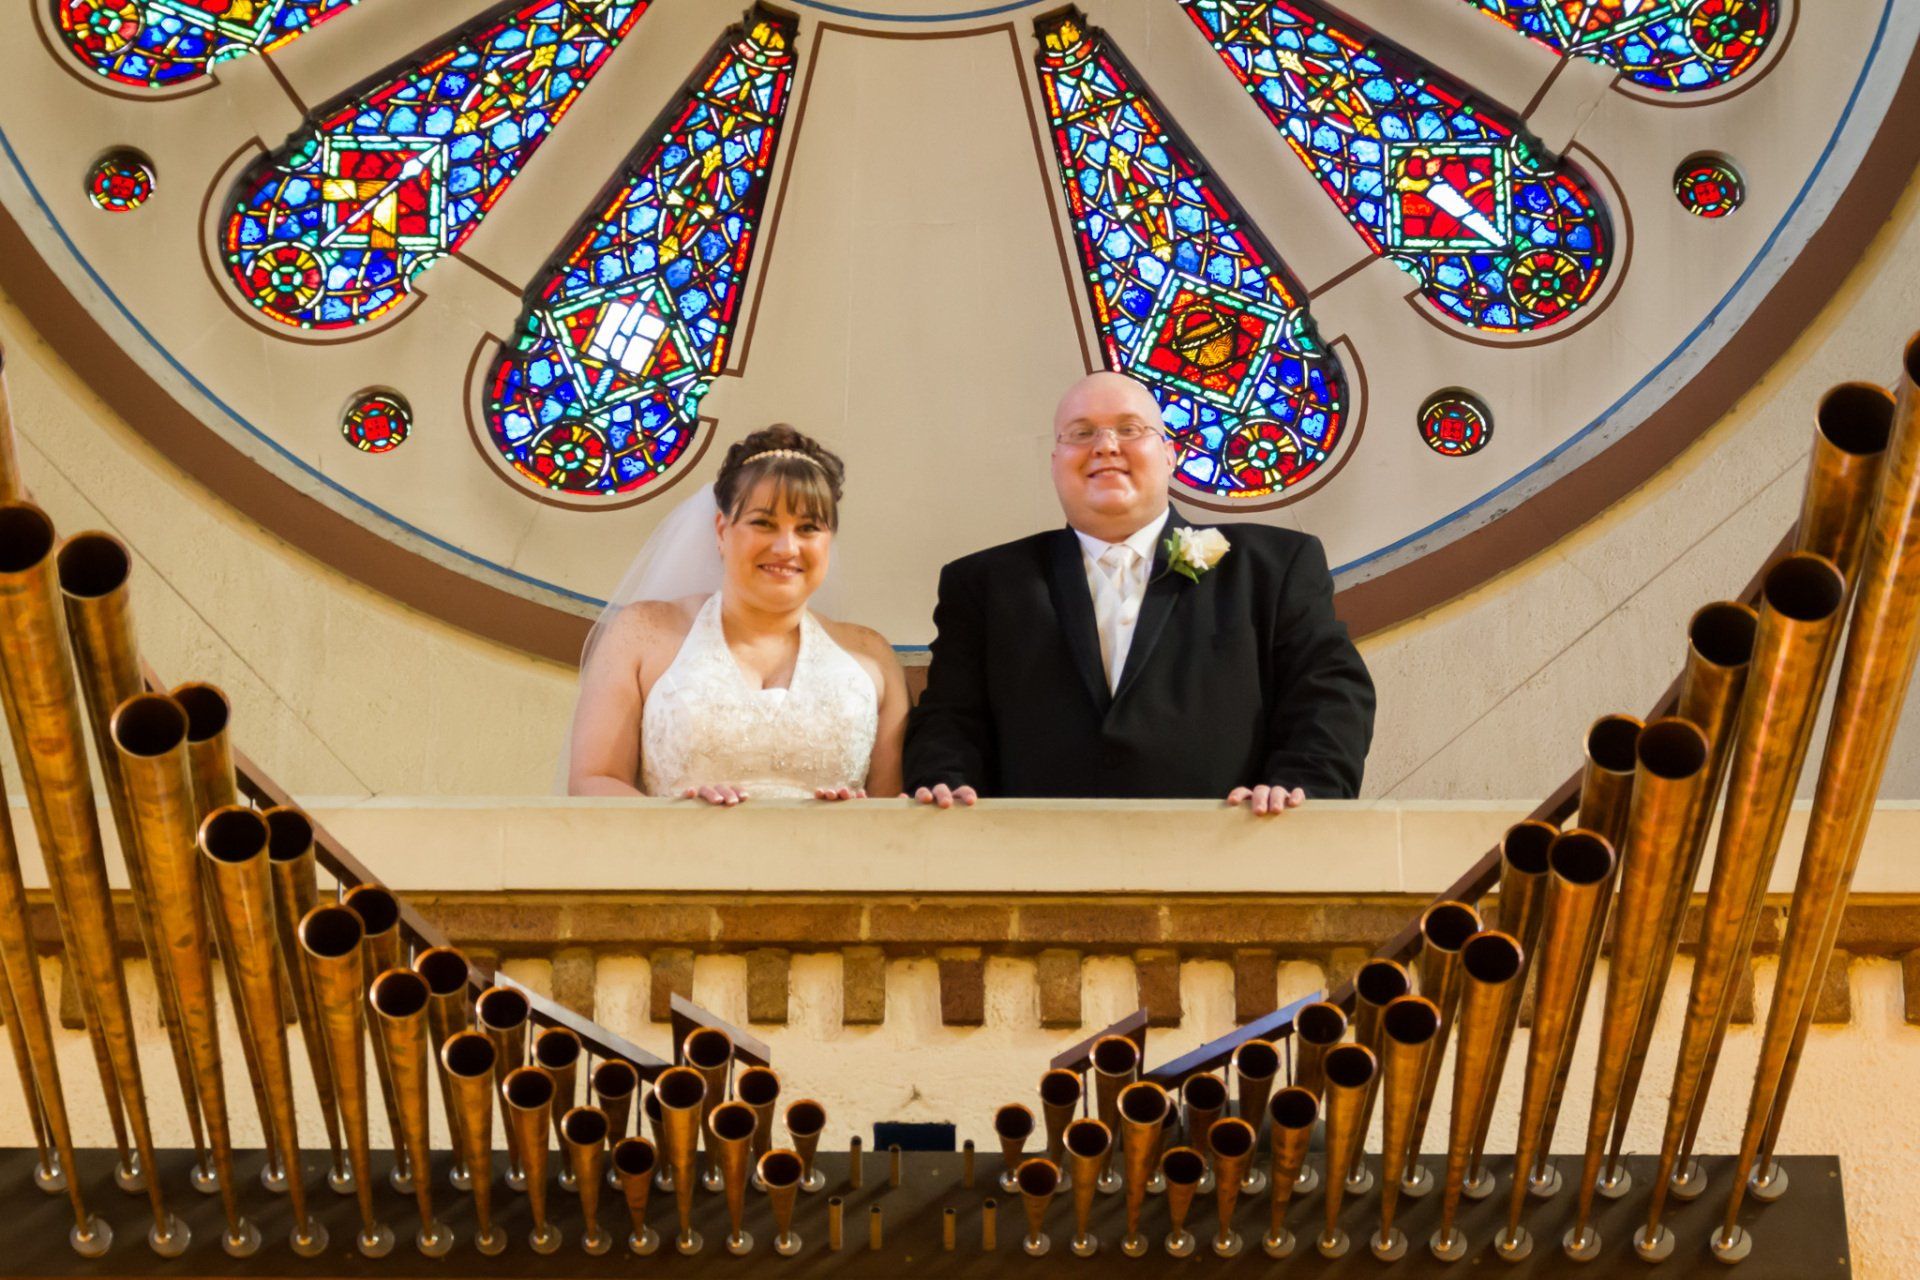 A portrait of the bride and groom standing in front of a brass pipe organ with a large circular stained glass window in the backgrounda